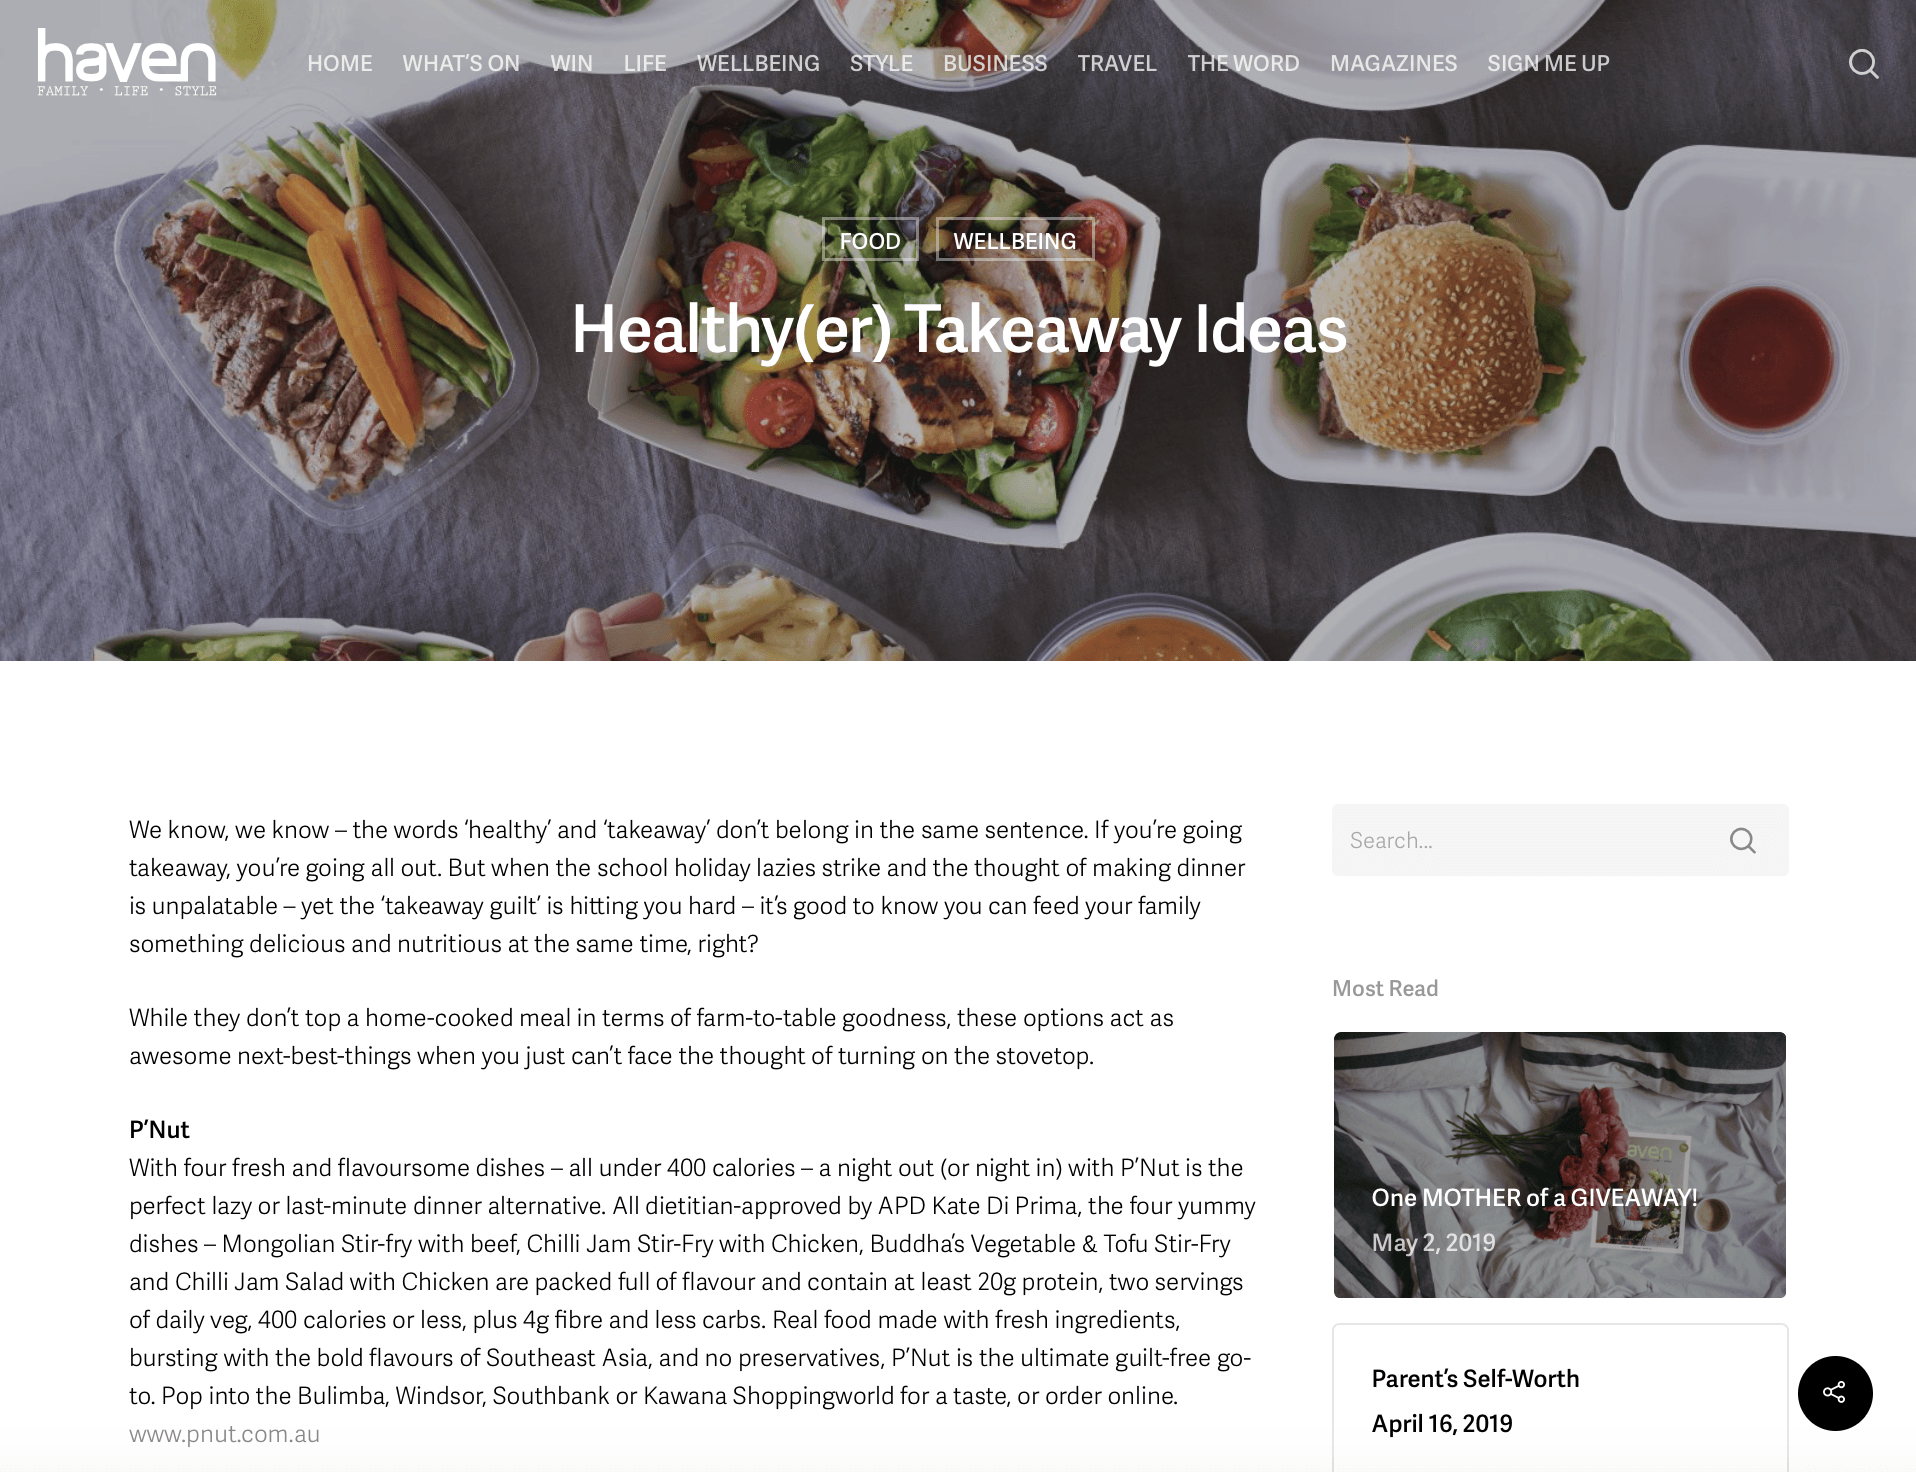 Haven Magazine outlines healthy takeaway options.